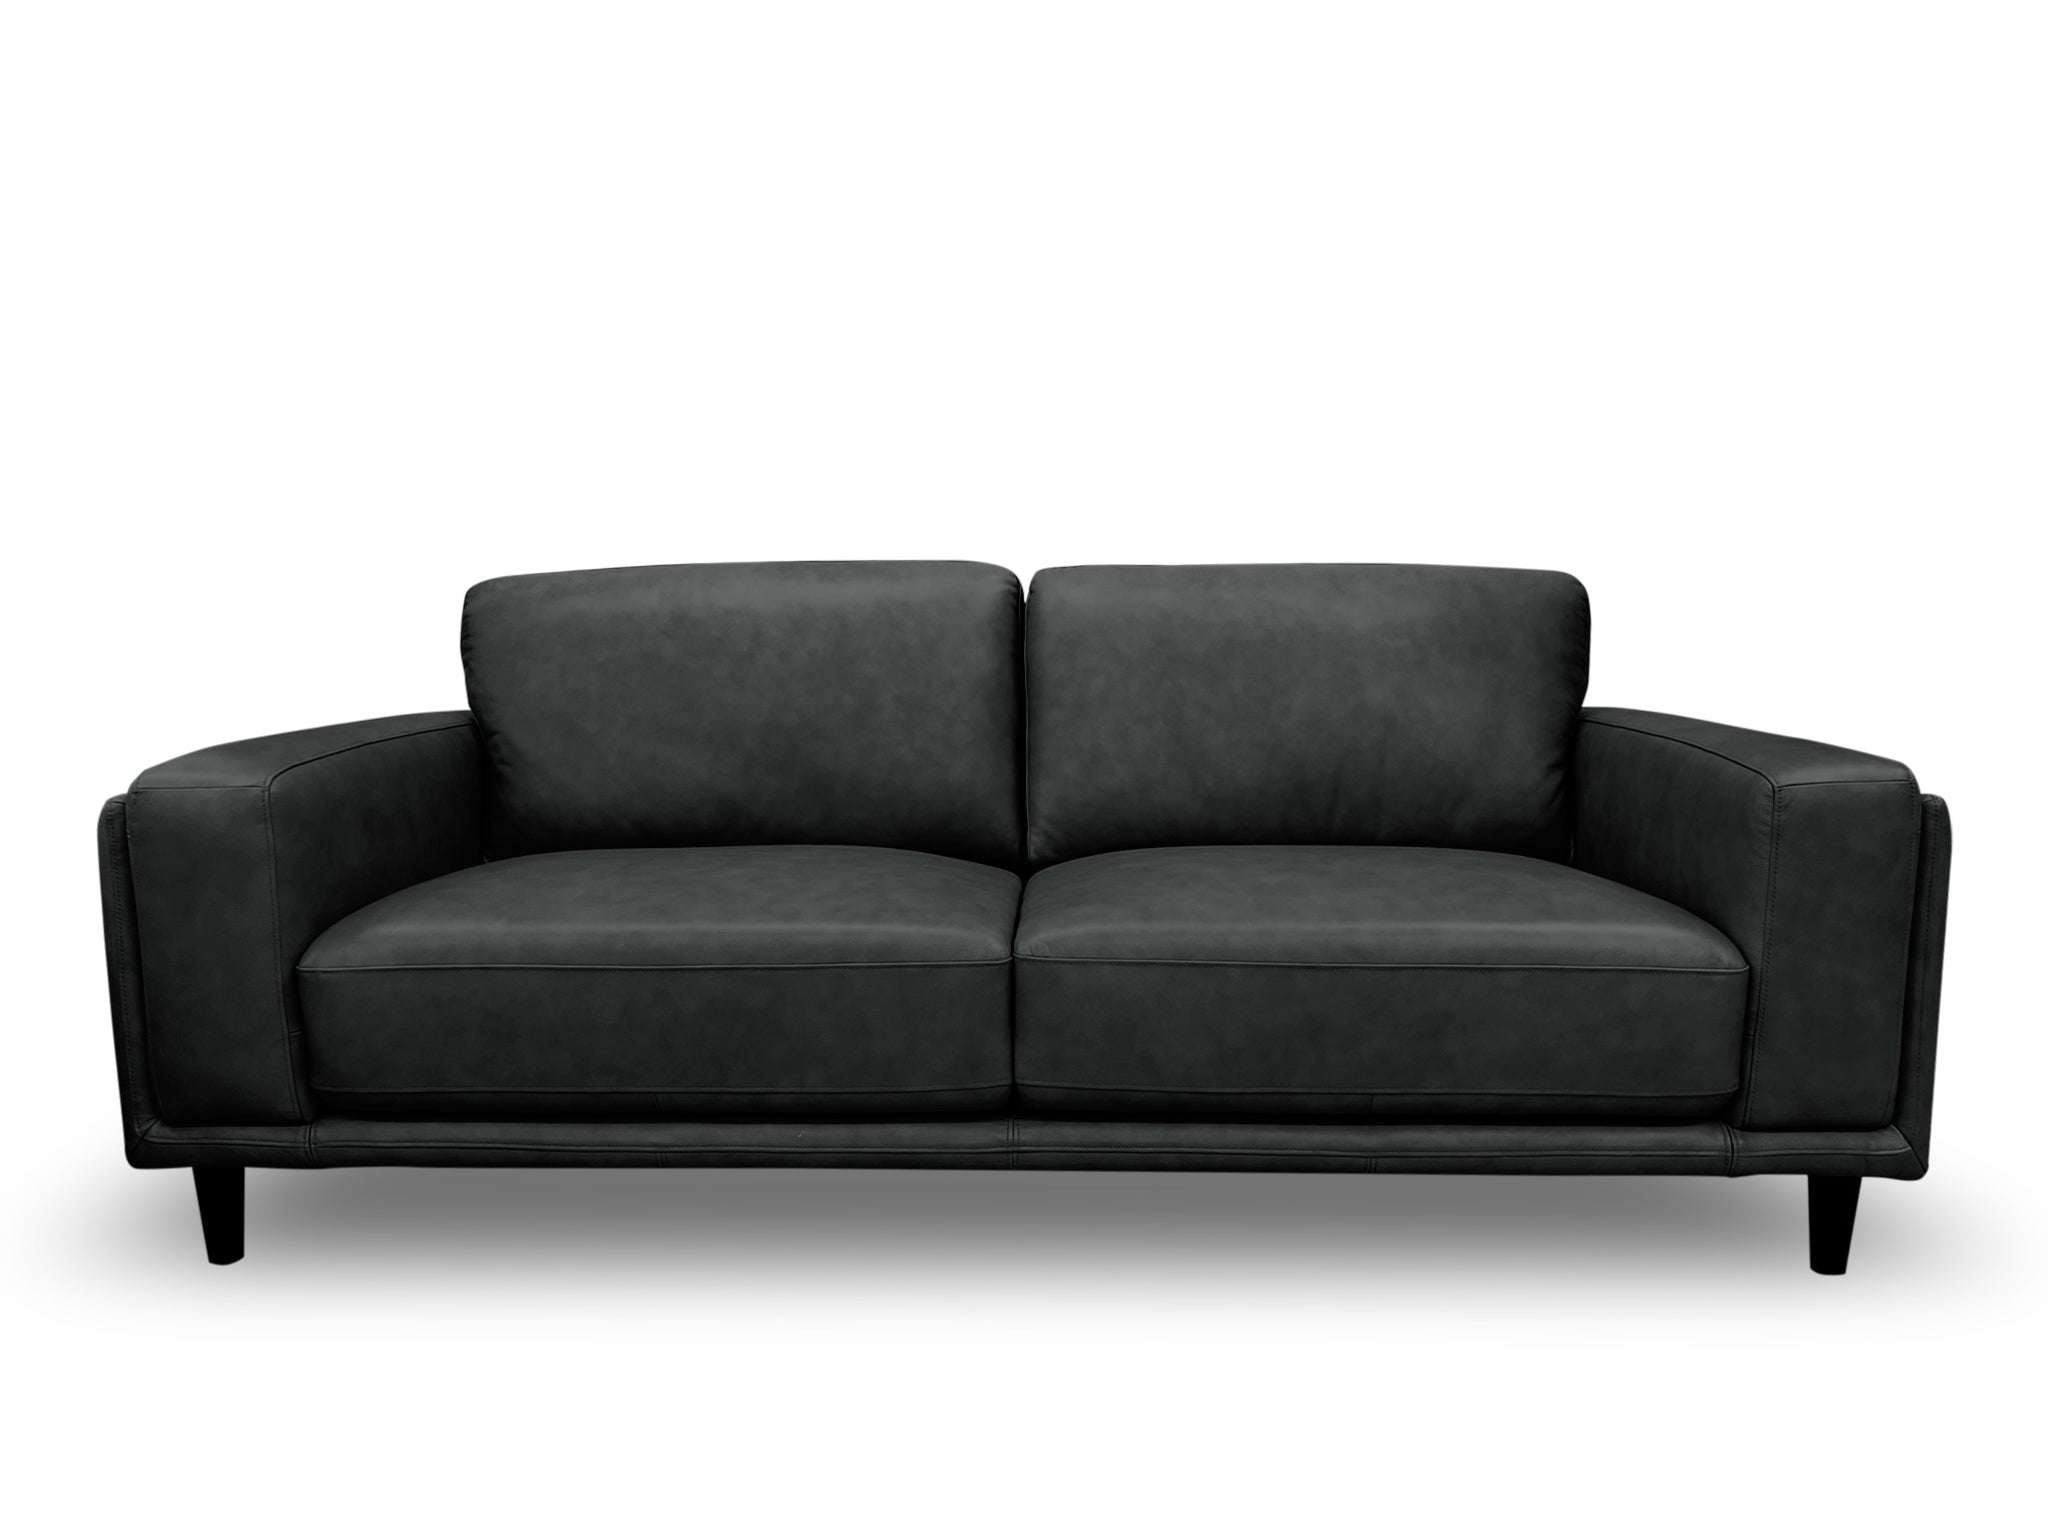 Daintree 3 seater sofa in charcoal leather